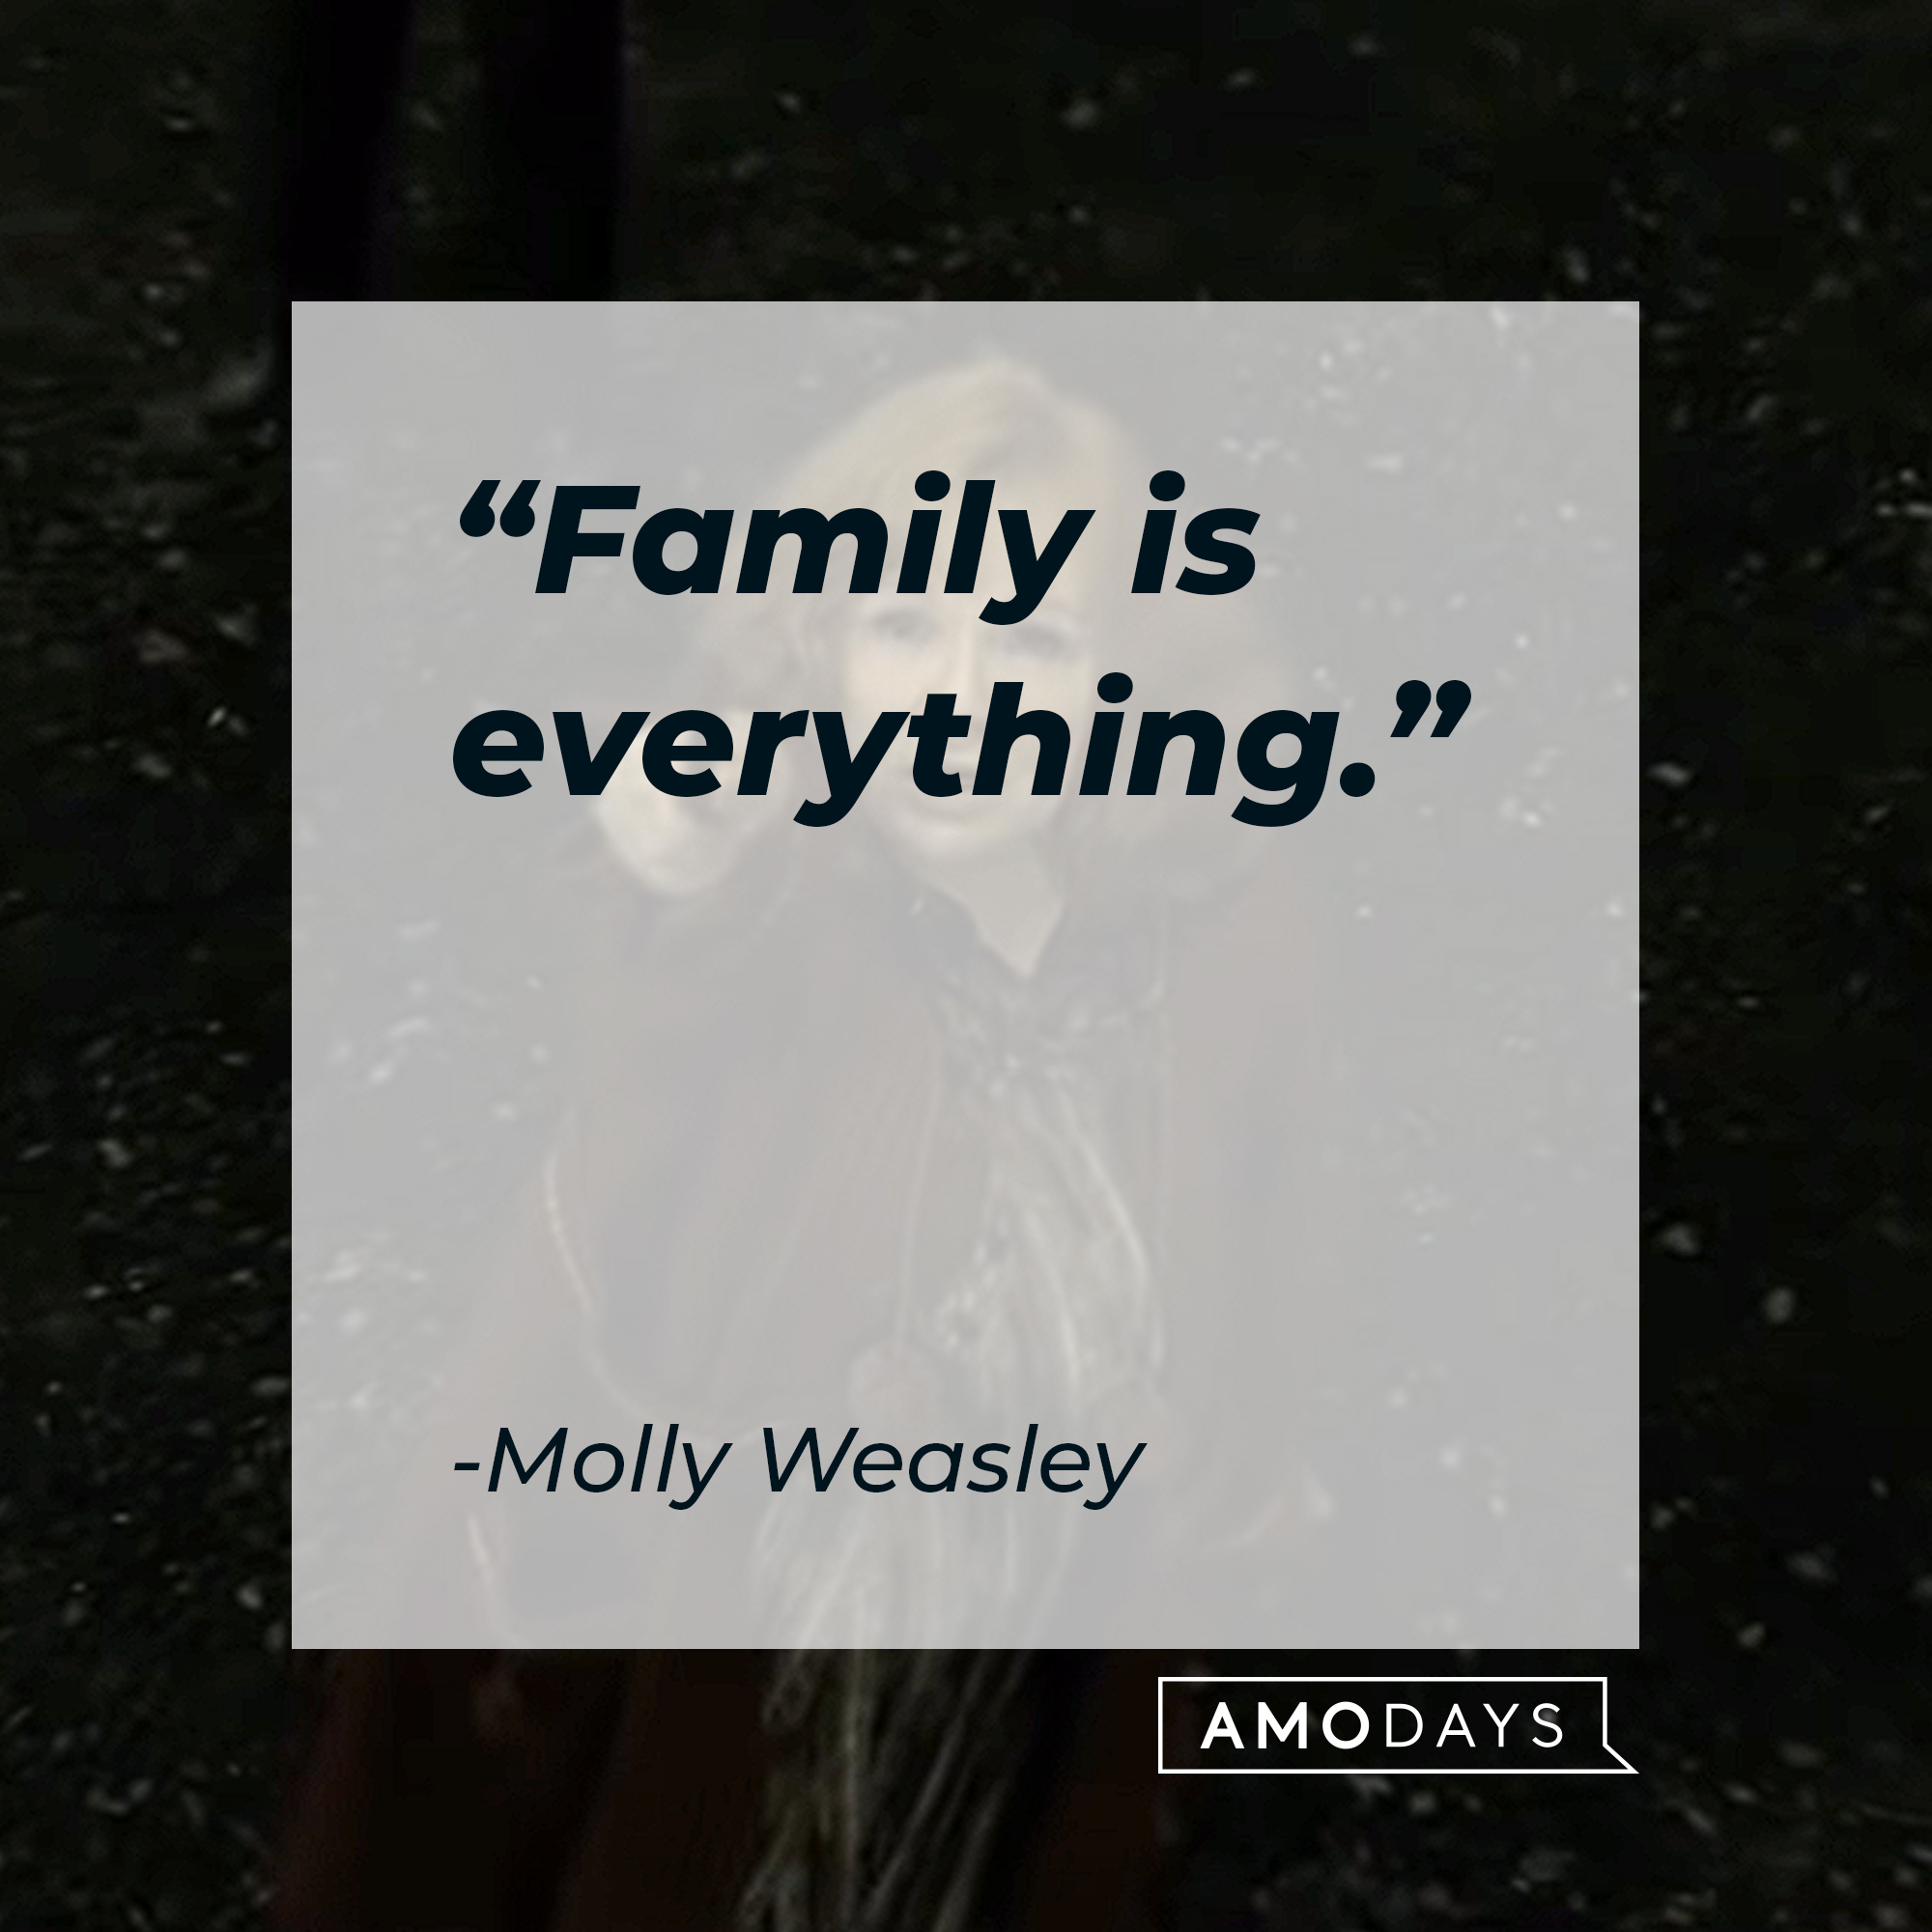 Molly Weasley's quote: "Family is everything." | Source: Youtube.com/harrypotter